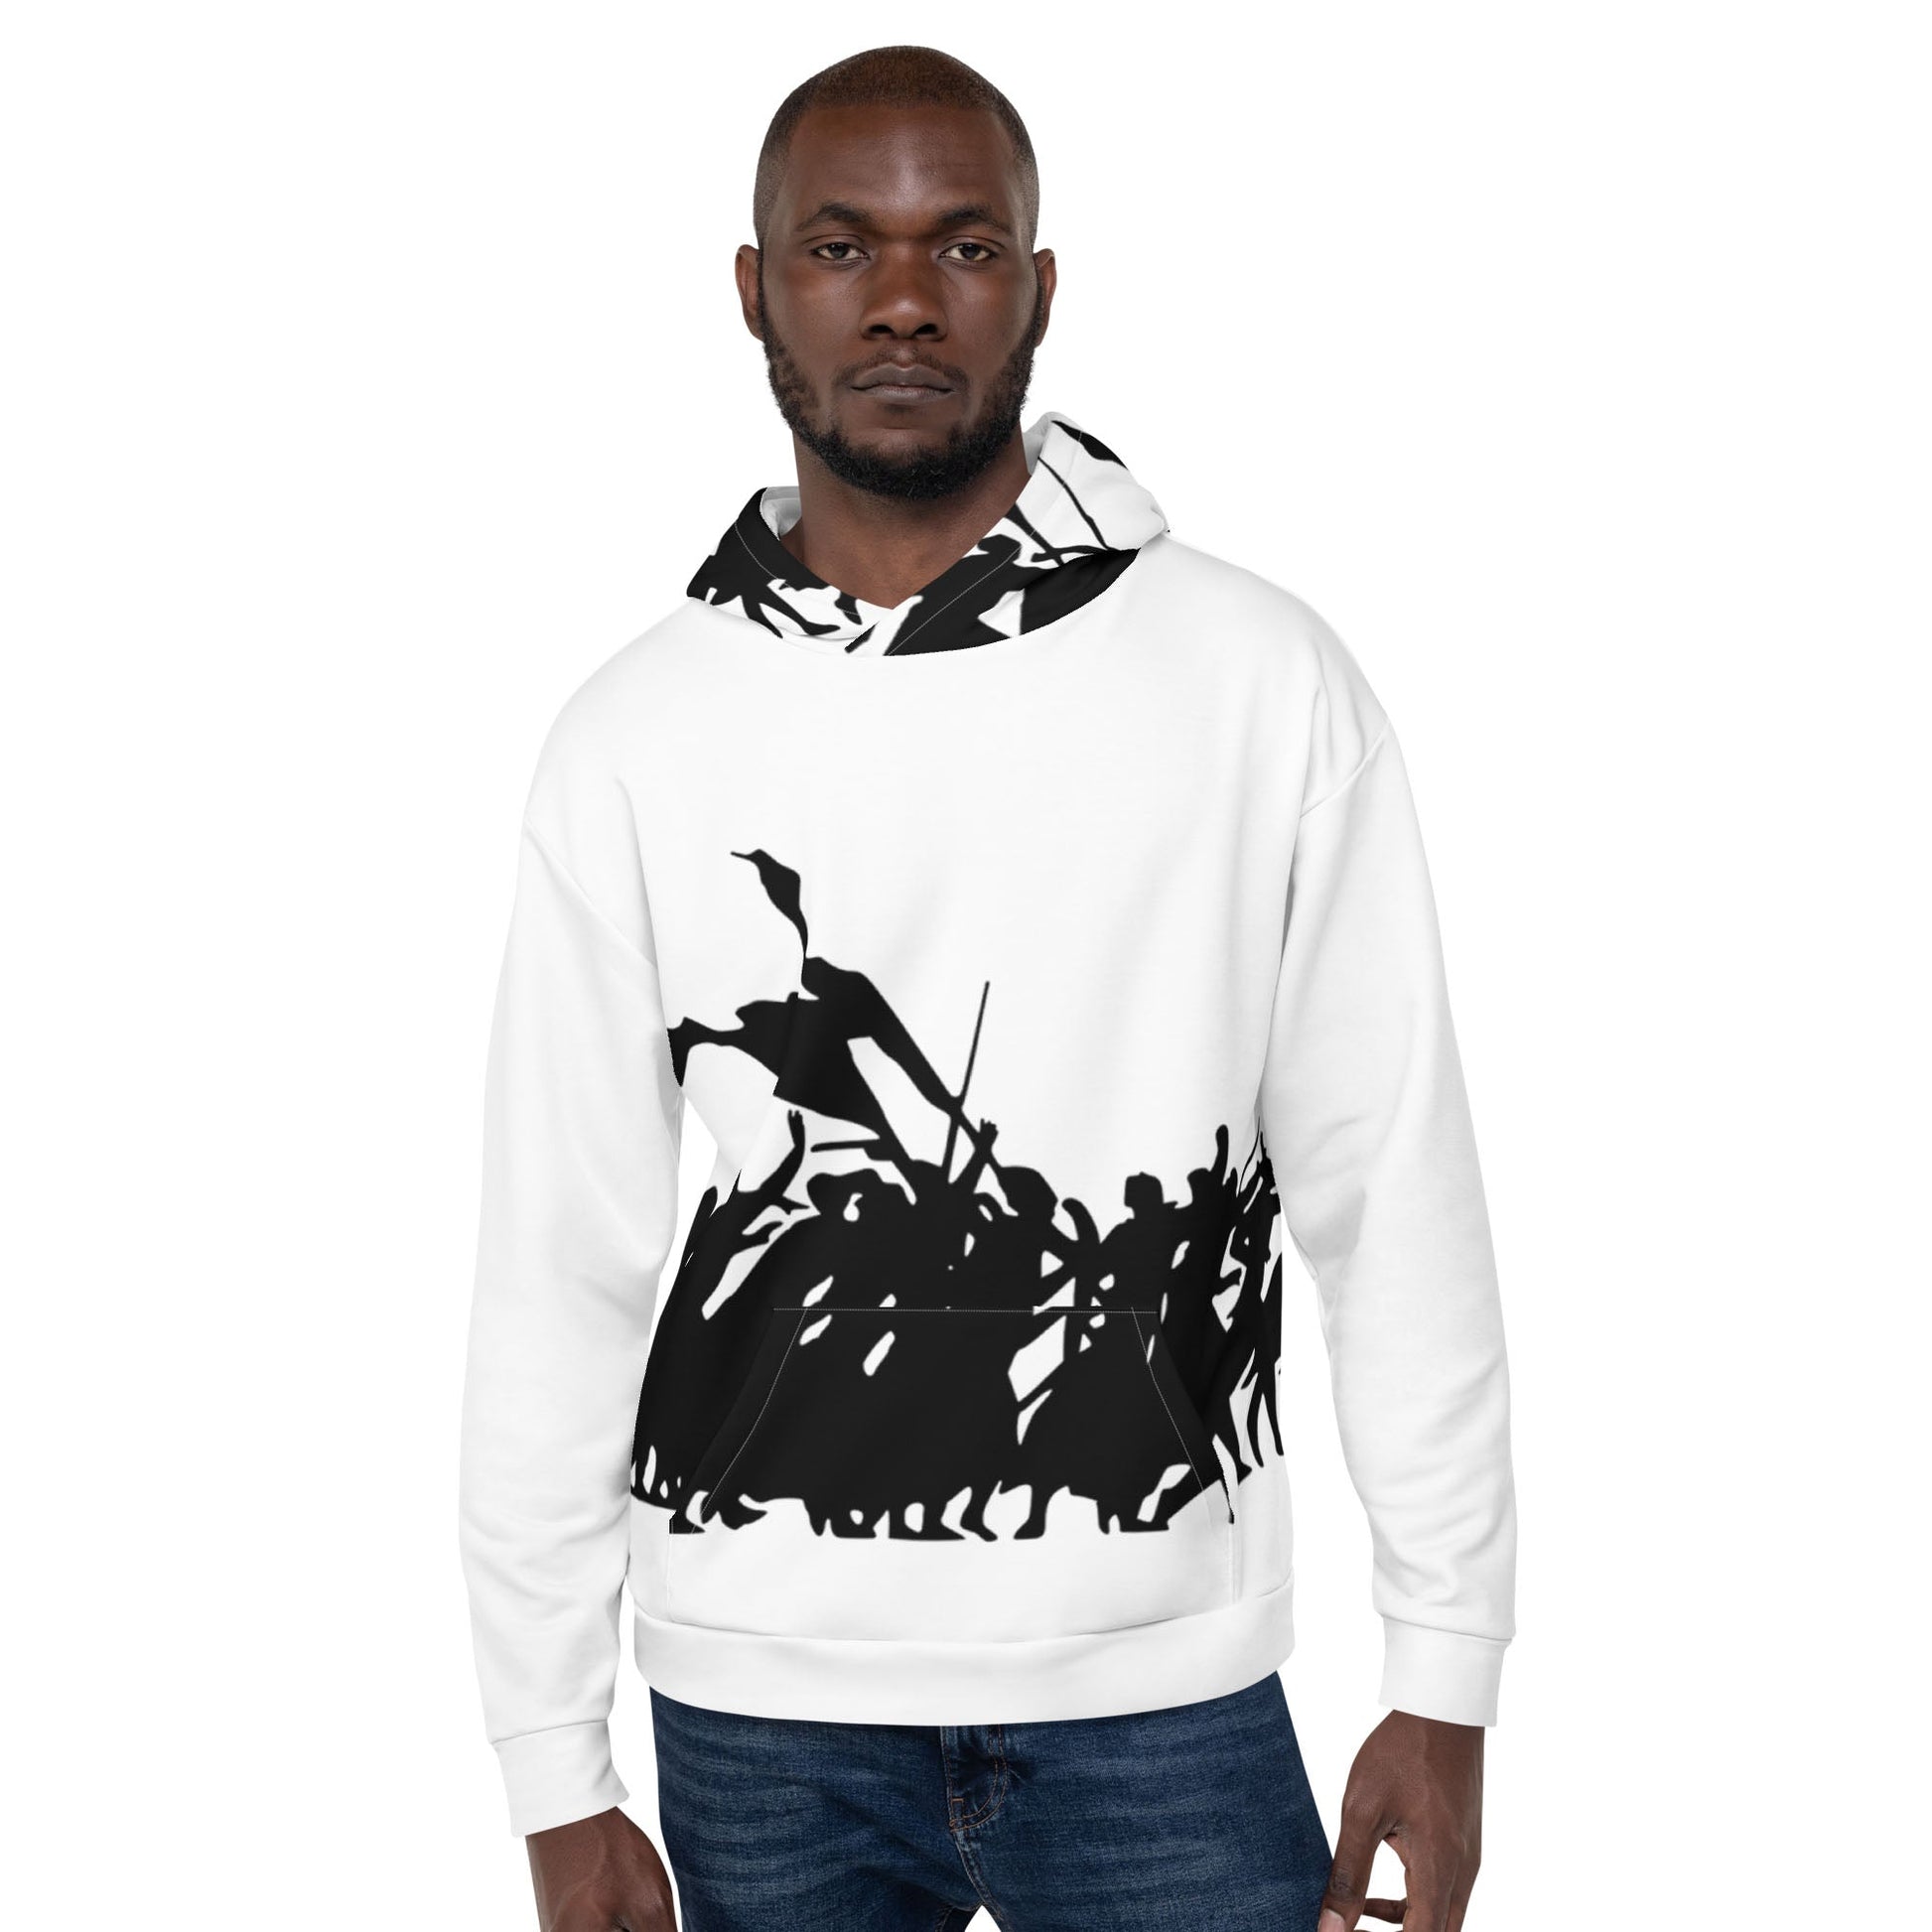 Protest - Unisex Hoodie - Souled Out World